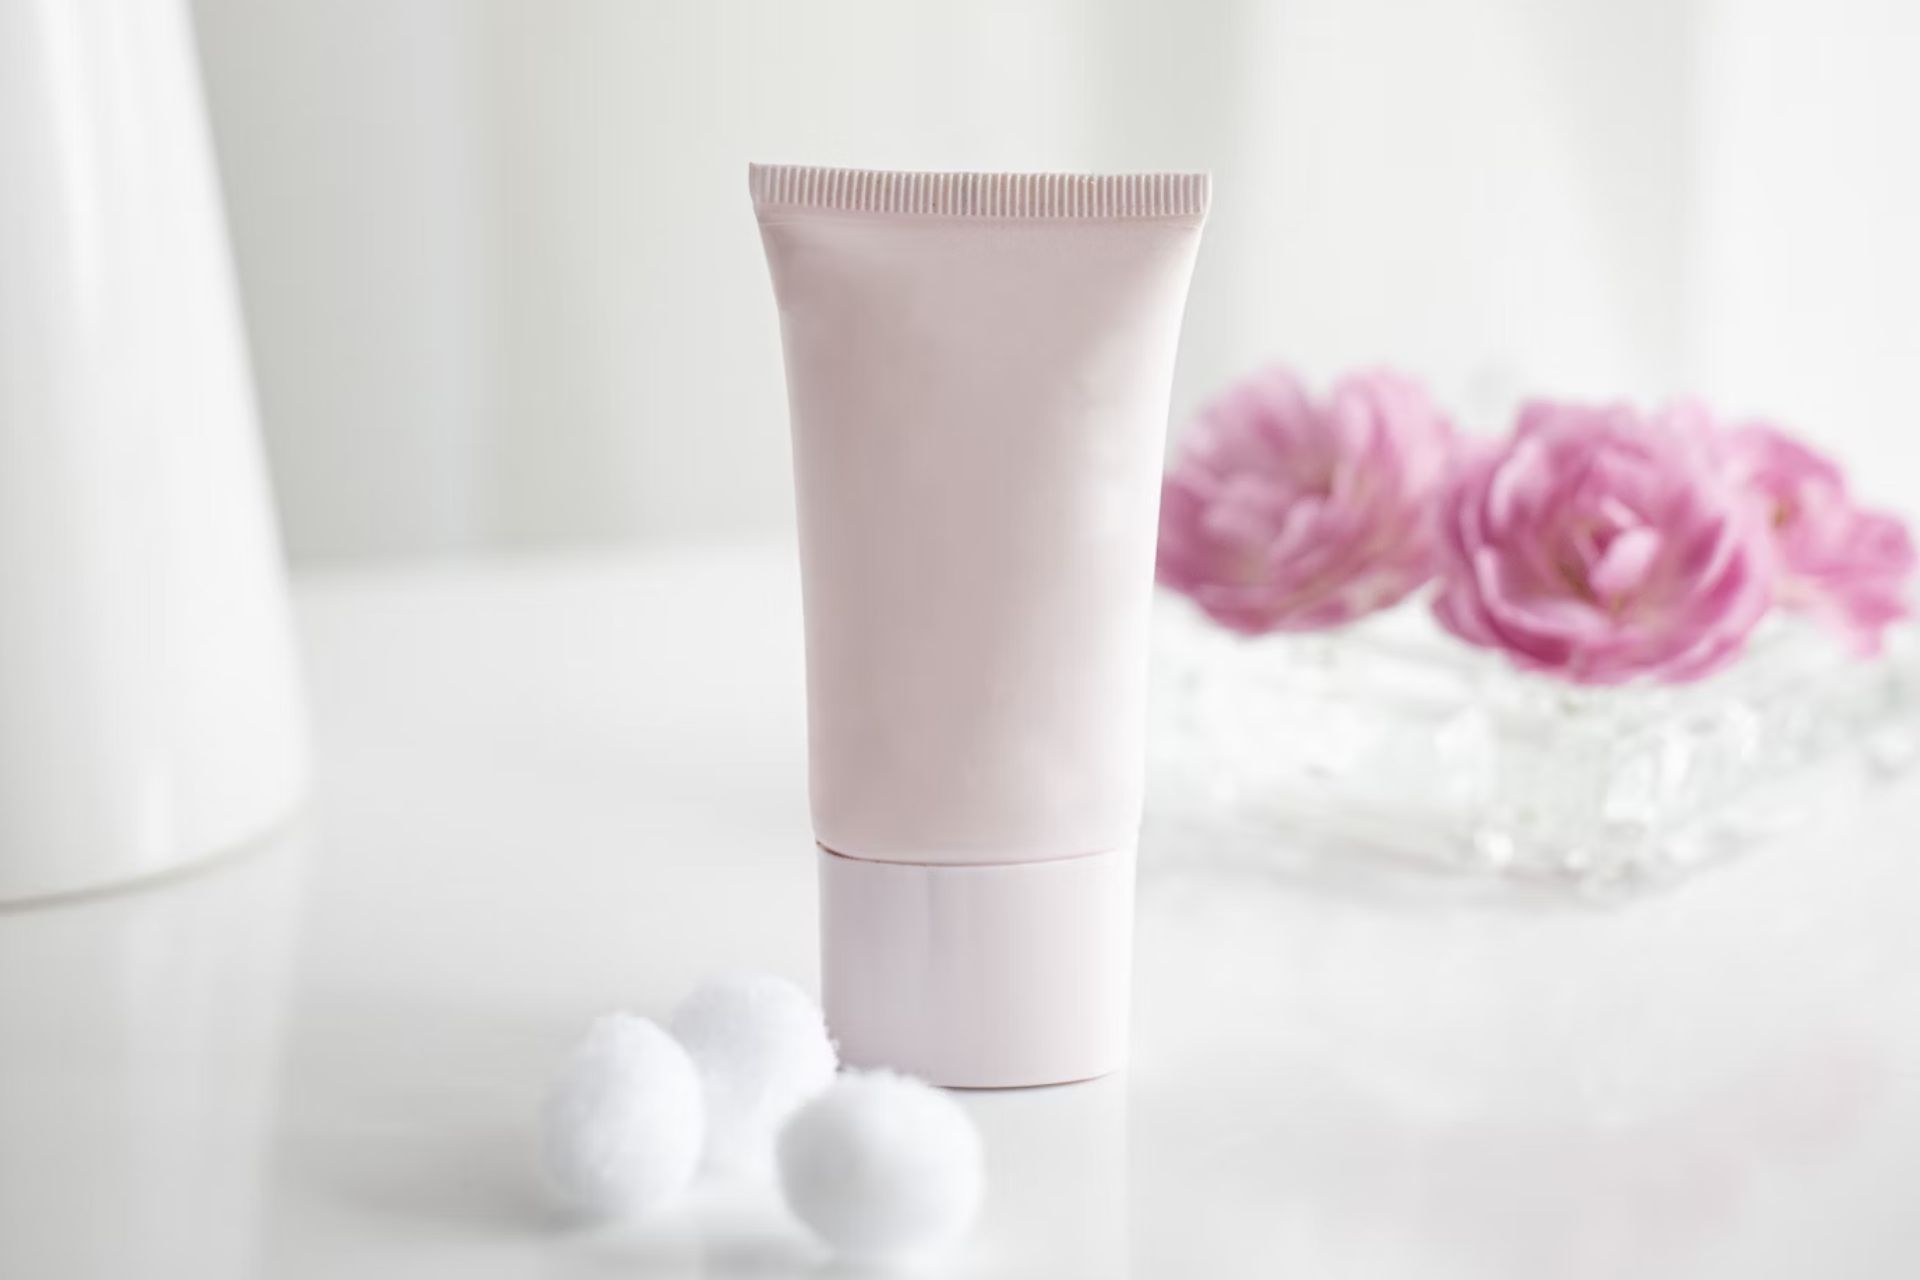 Korean skin care products might be more simplistic and natural than the combinations you're used to -- like this nameless pink tube of cream set against a white background. There are pink roses in a vase in the back, reminding you how fragile your skin is.